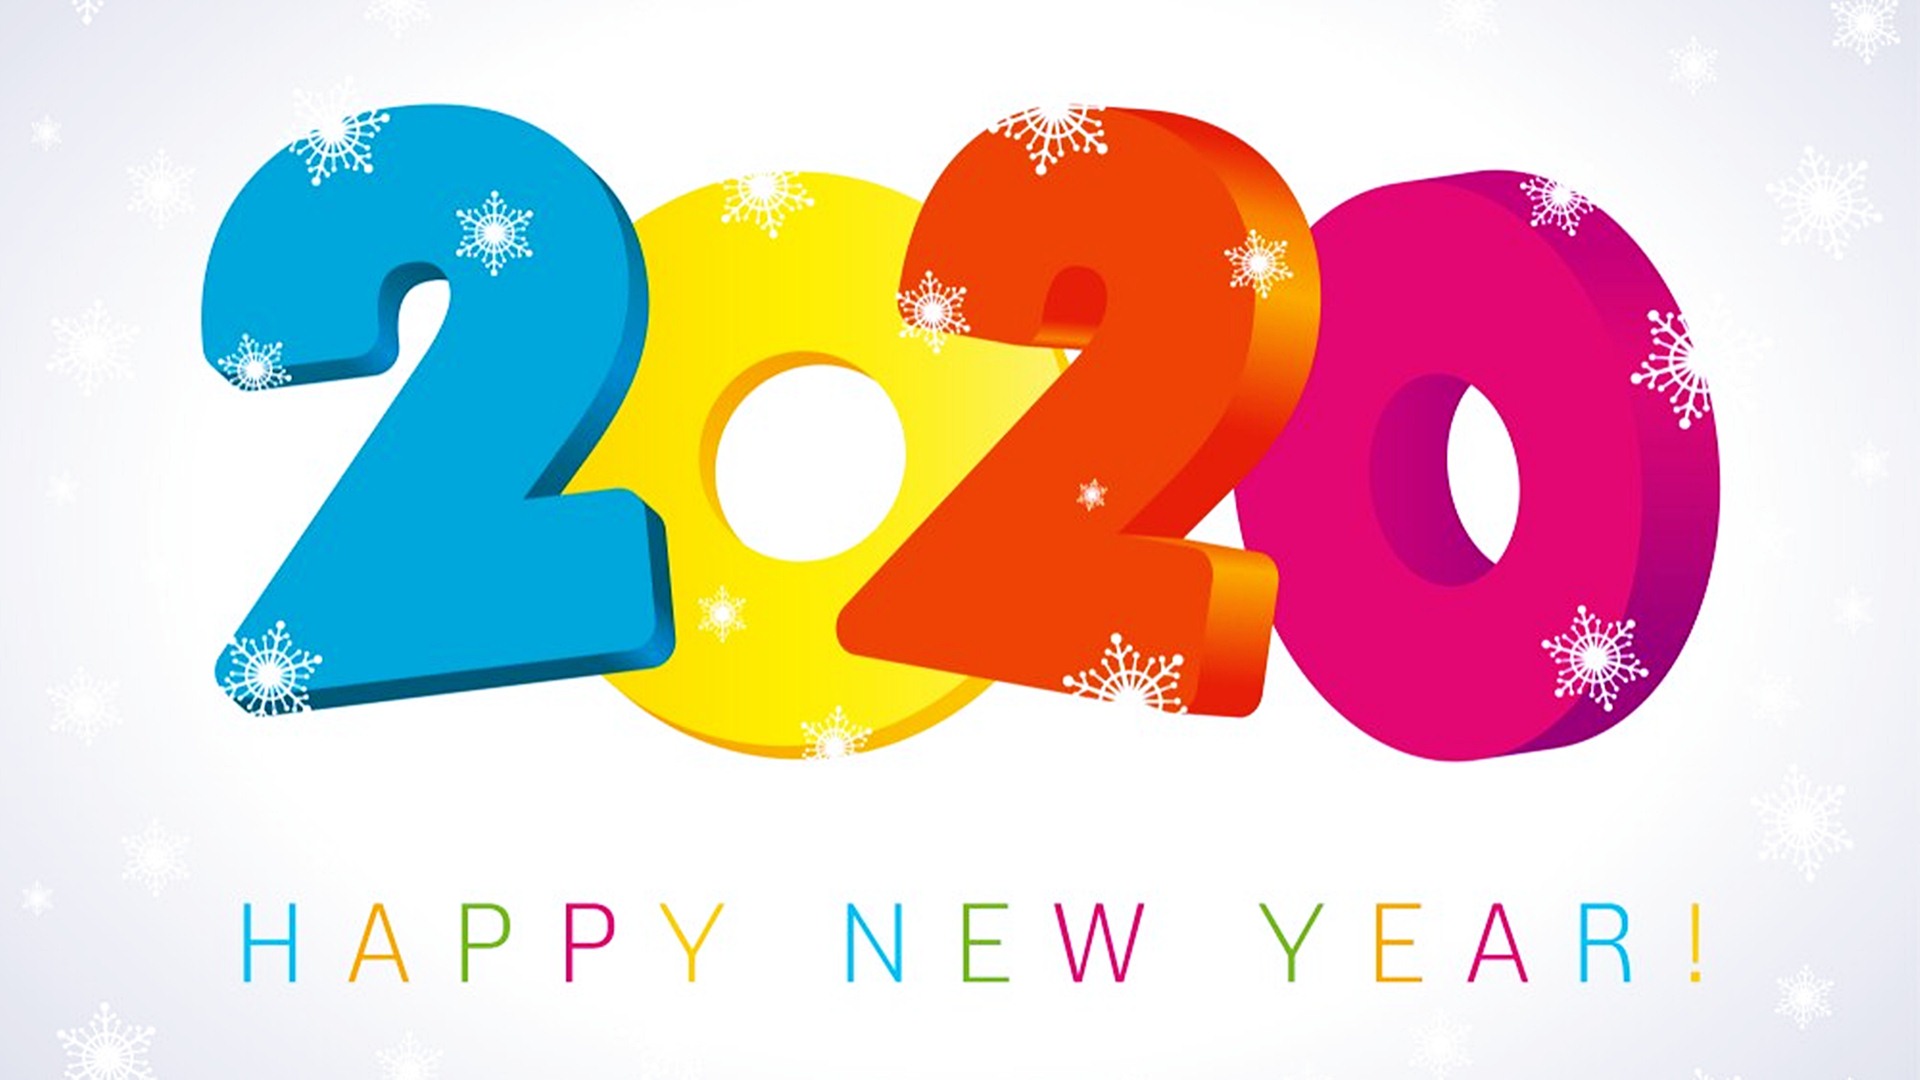 Happy New Year 2020 wishes HD images